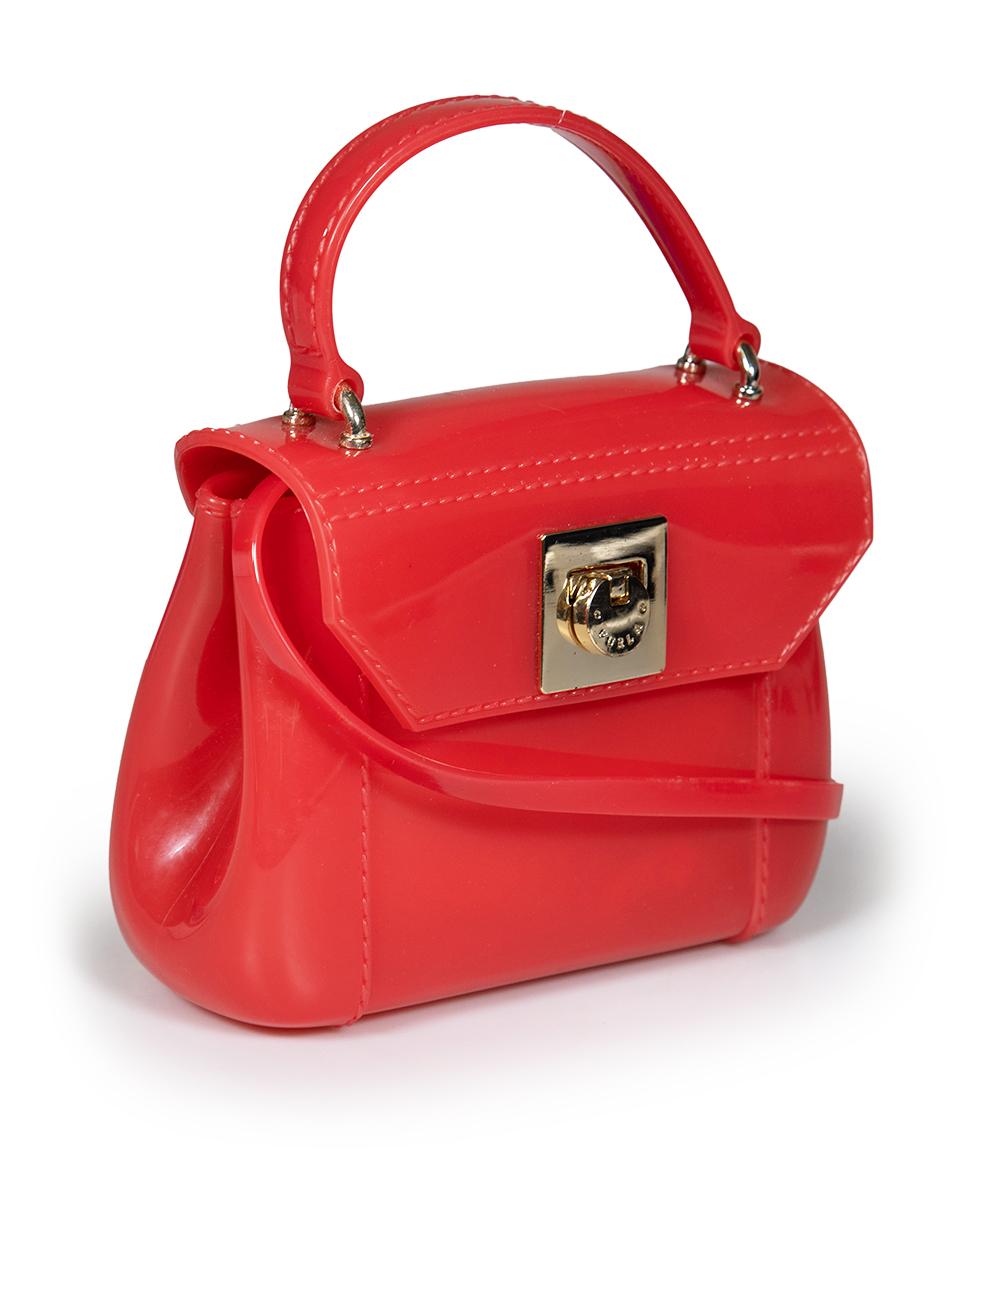 CONDITION is Good. Minor wear to bag is evident. Light wear to the metal hardware with scratches on this used Furla designer resale item.
 
 
 
 Details
 
 
 Model: Candy Bon Bon
 
 Red
 
 Plastic
 
 Mini crossbody bag
 
 1x Snap button detachable